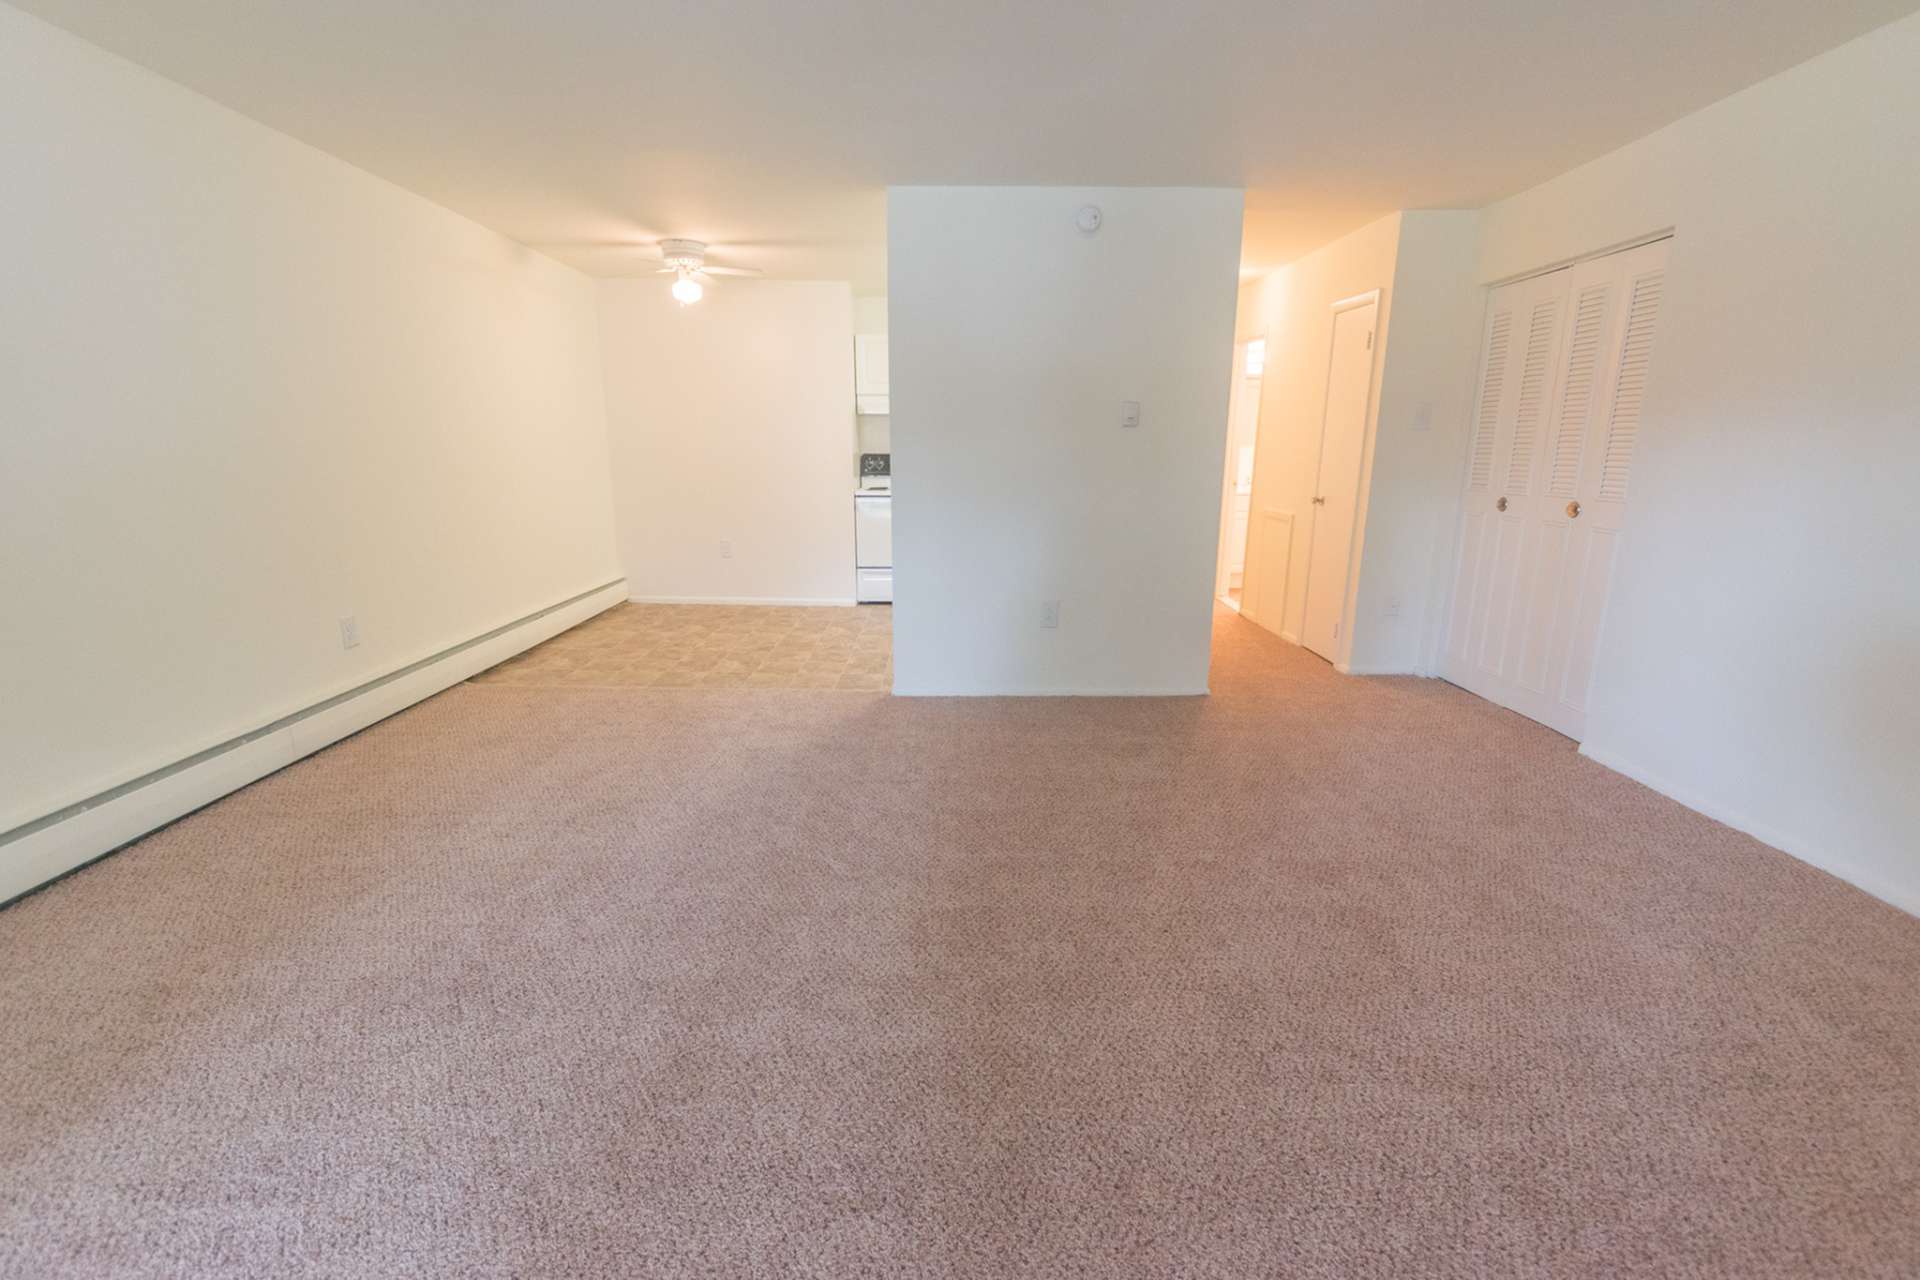 Carpeted living room area connected to the dining and kitchen area in a West Chester, PA apartment.